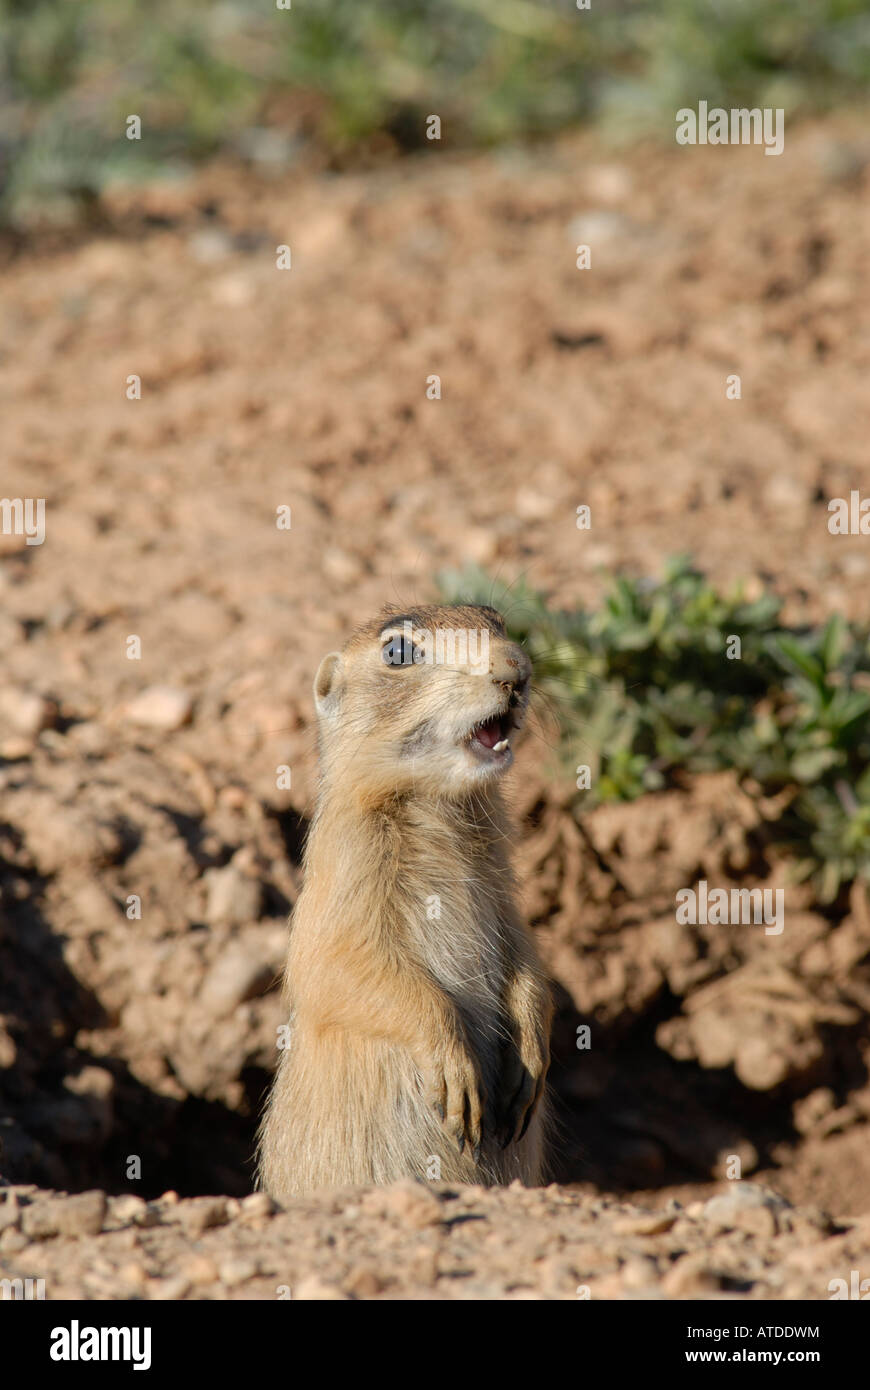 Stock photo of a young Utah prairie dog chattering at his burrow. Stock Photo